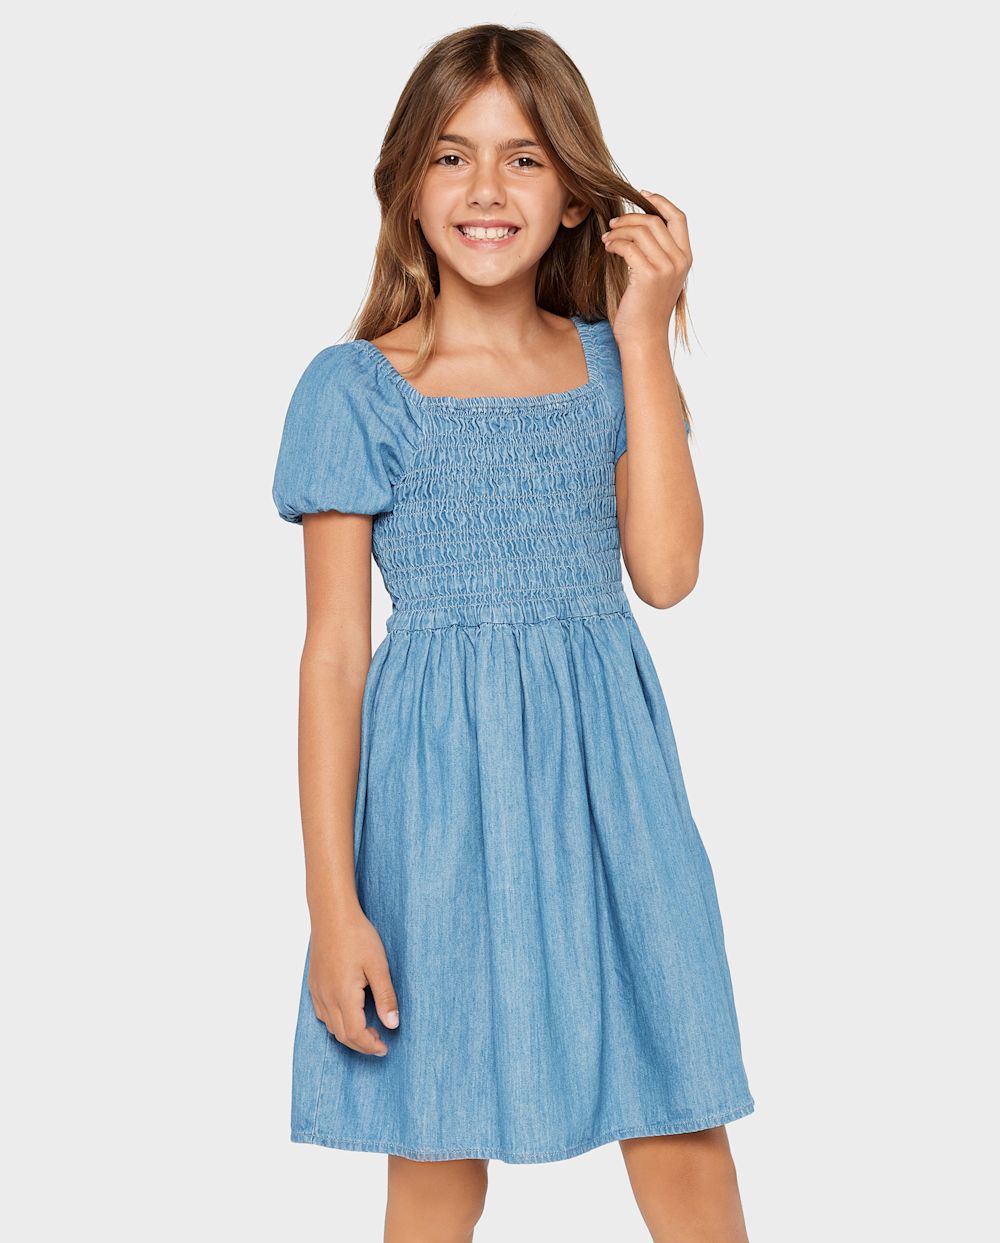 Girls Smocked Square Neck Puff Sleeves Short Sleeves Sleeves Above the Knee Dress